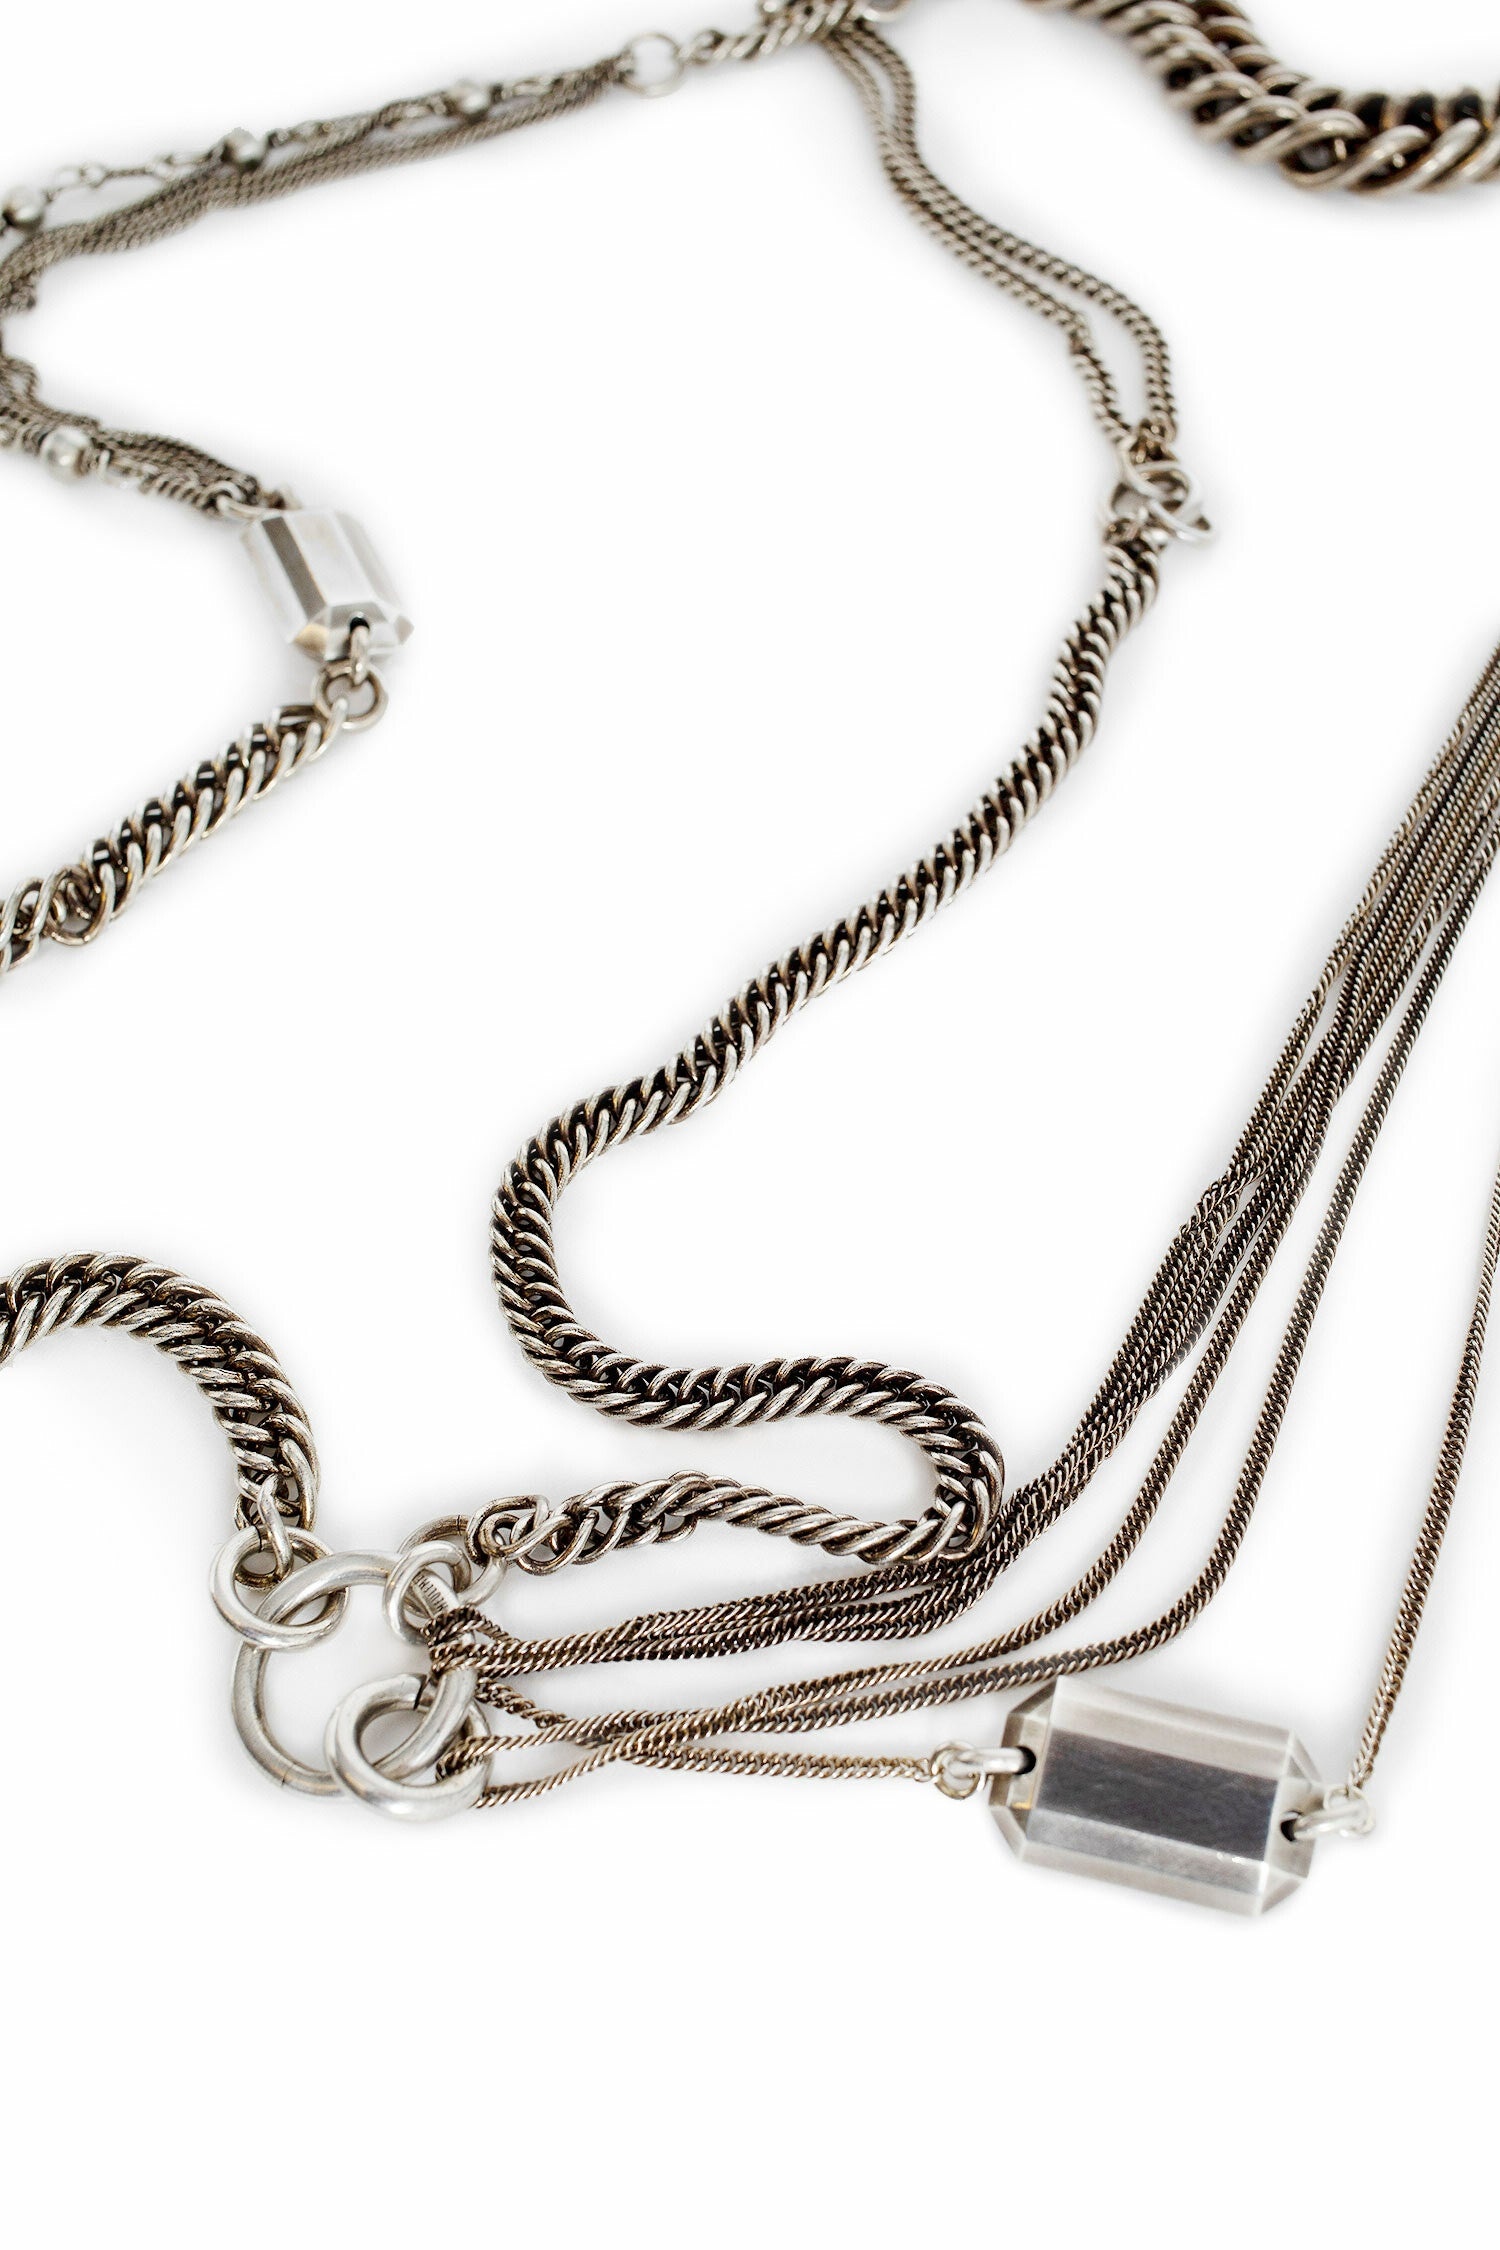 ANN DEMEULEMEESTER WOMAN SILVER NECKLACES - 2